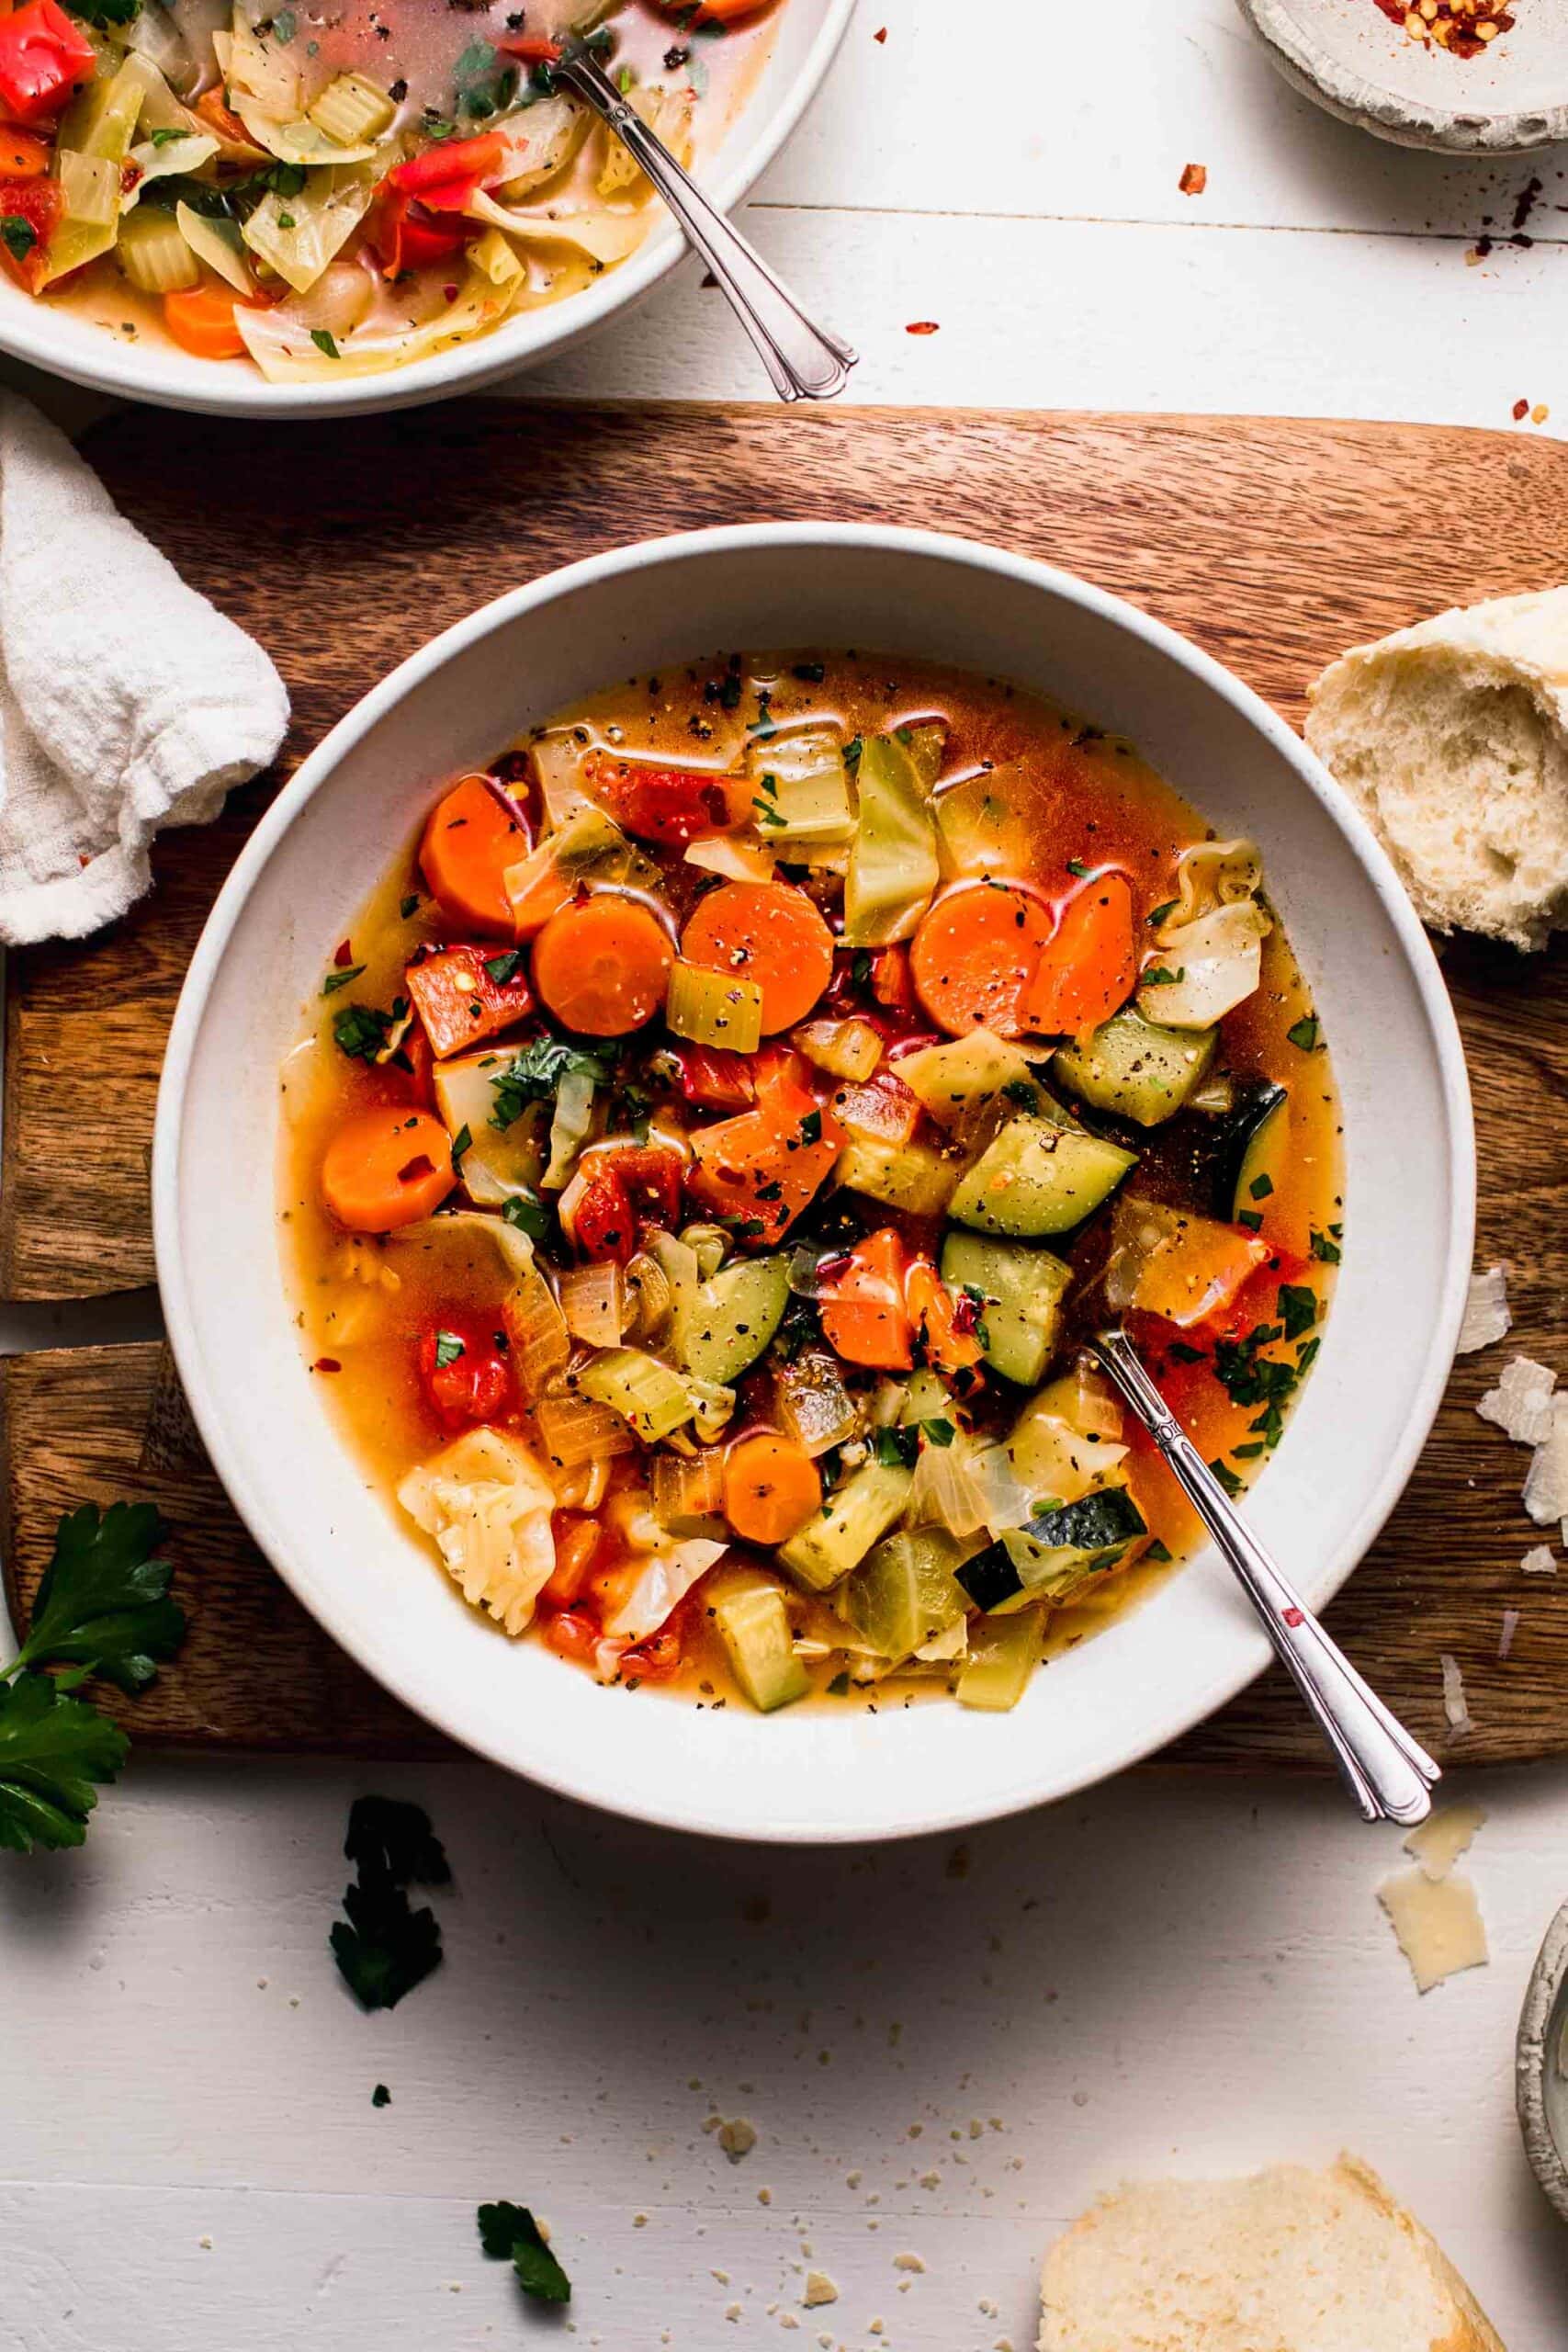 Top 4 Cabbage Diet Soup Recipes